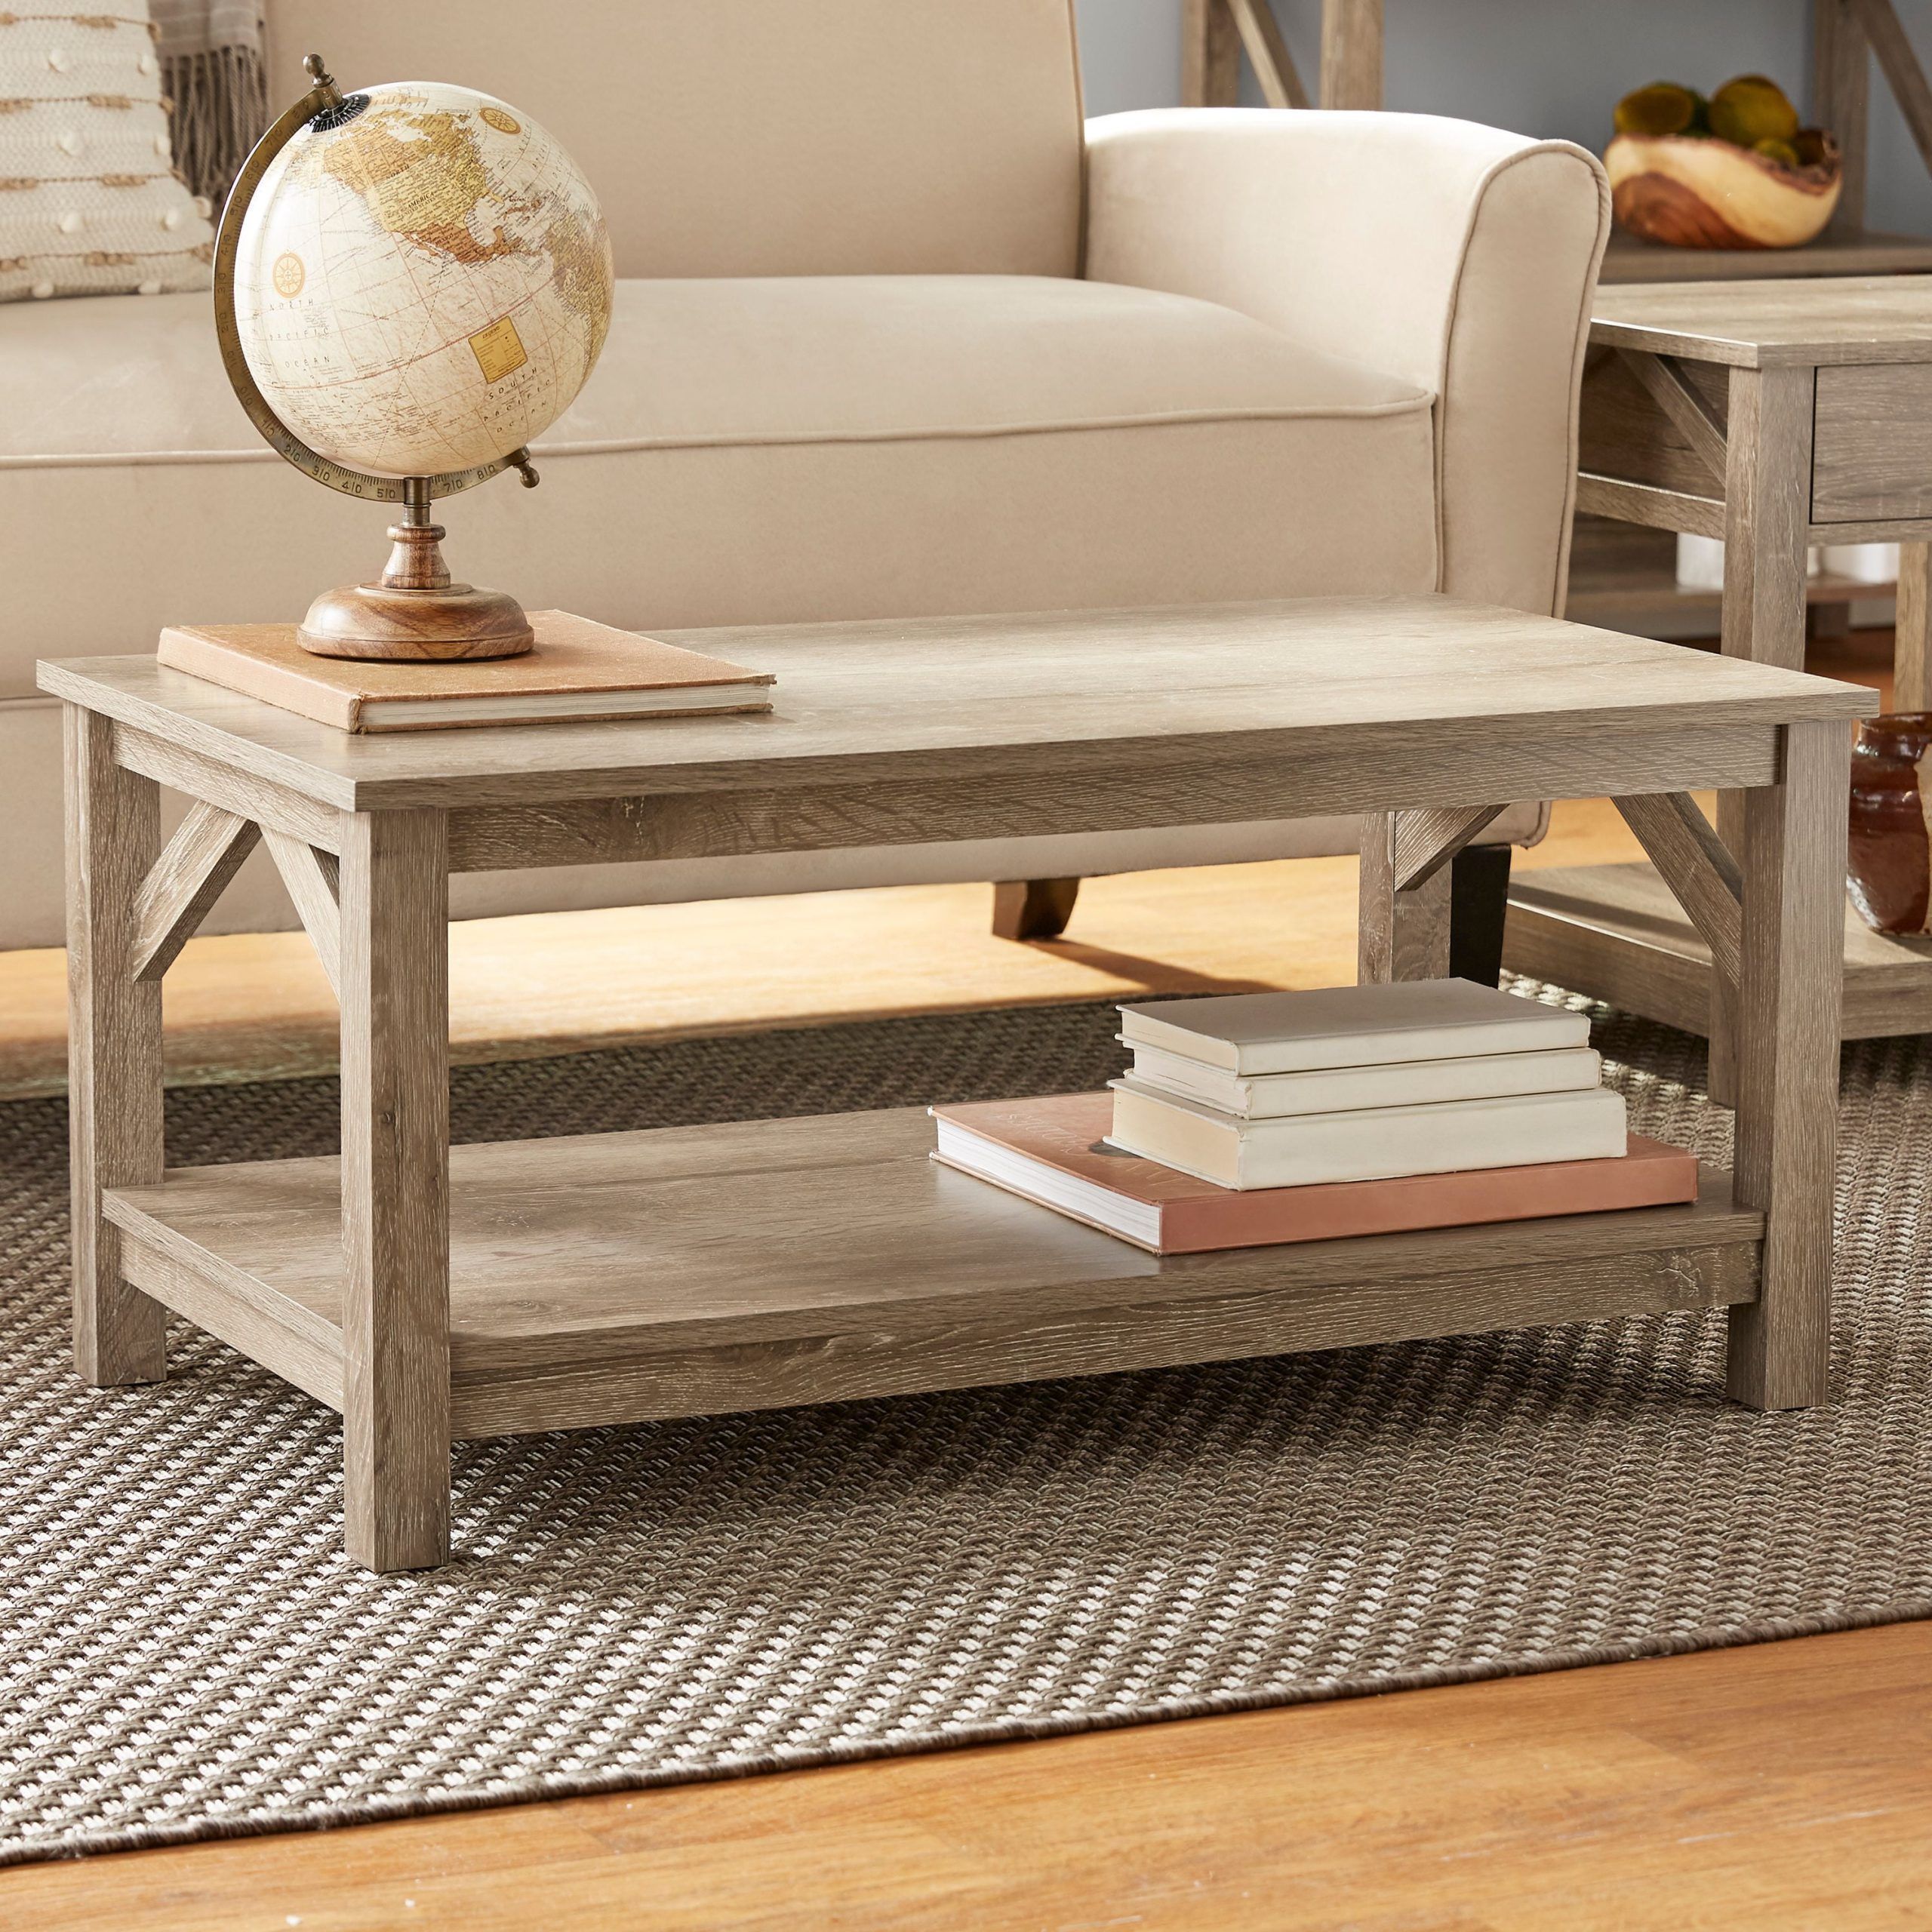 Mainstays Aston Mills Rustic Farmhouse Coffee Table, Rustic Brown Pertaining To Rustic Coffee Tables (View 2 of 15)